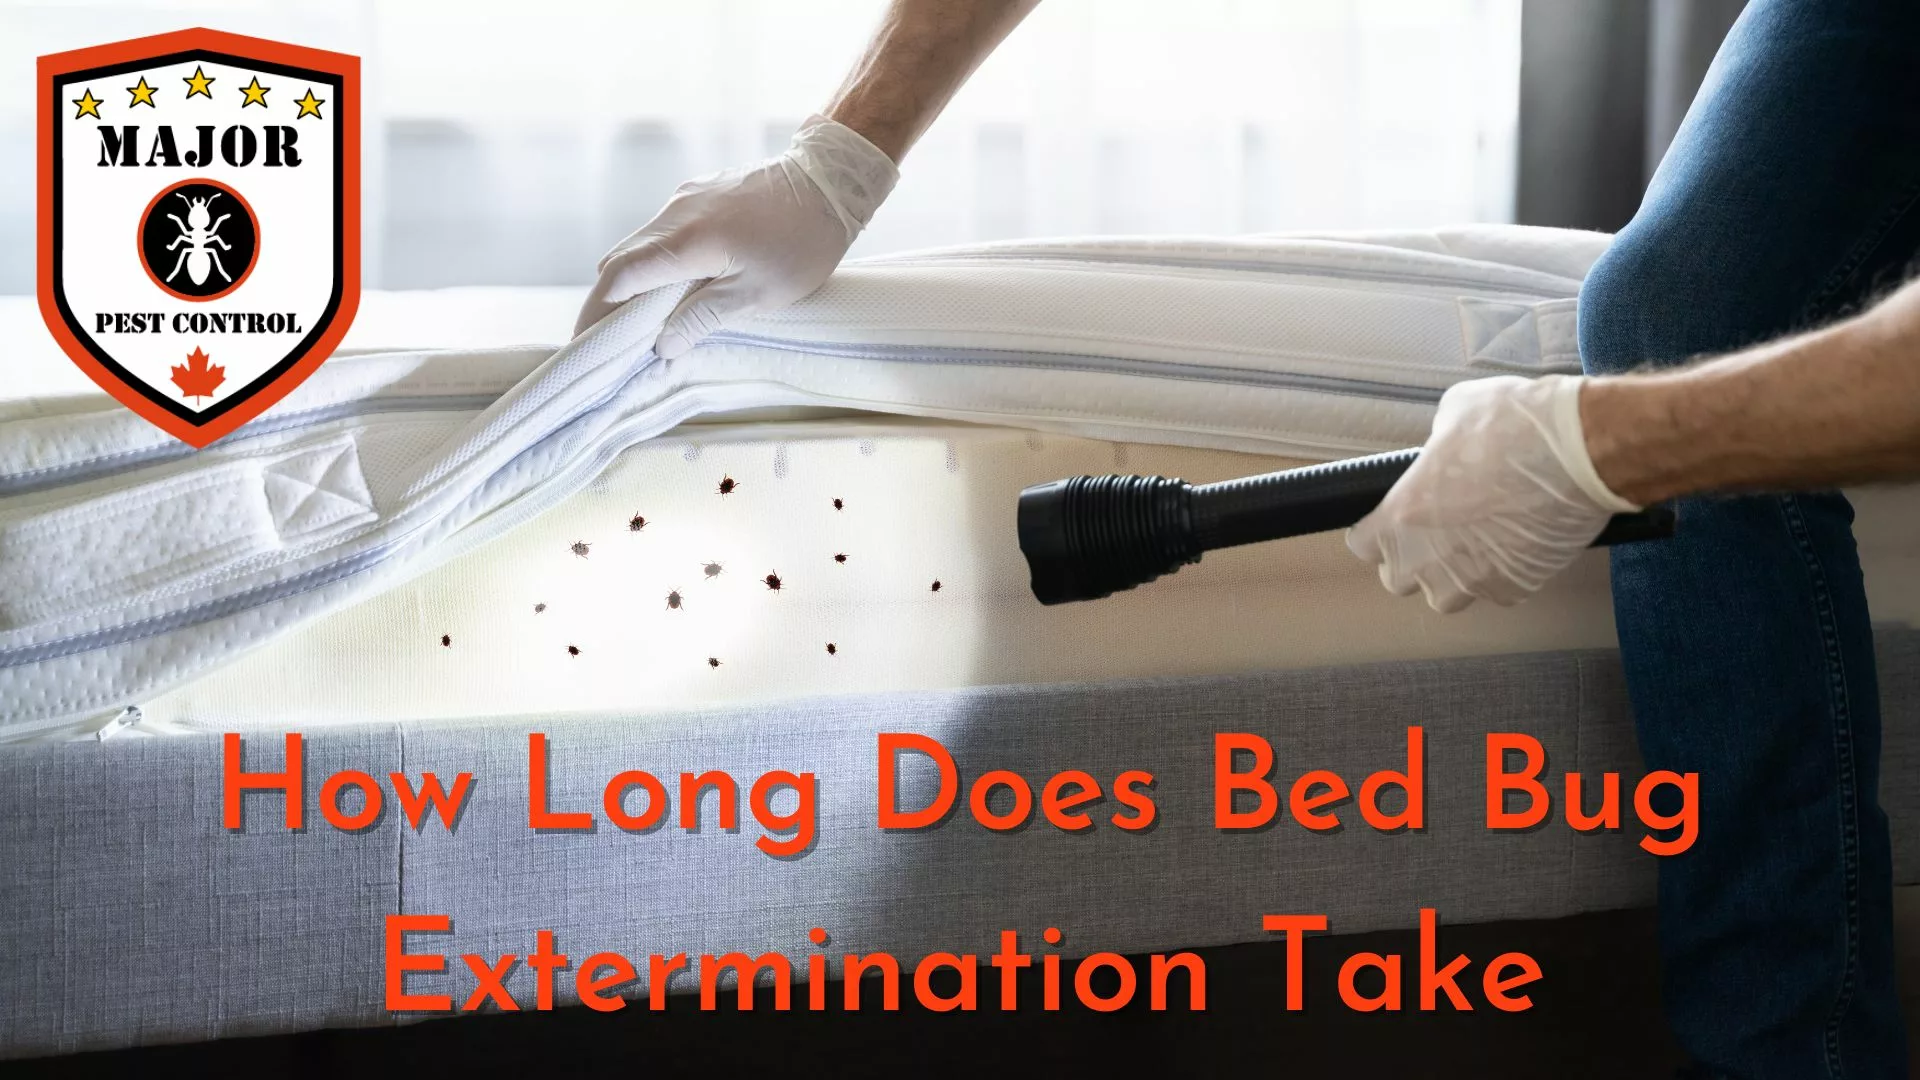 How Long Does Bed Bug Extermination Take by Major Pest Control Calgary